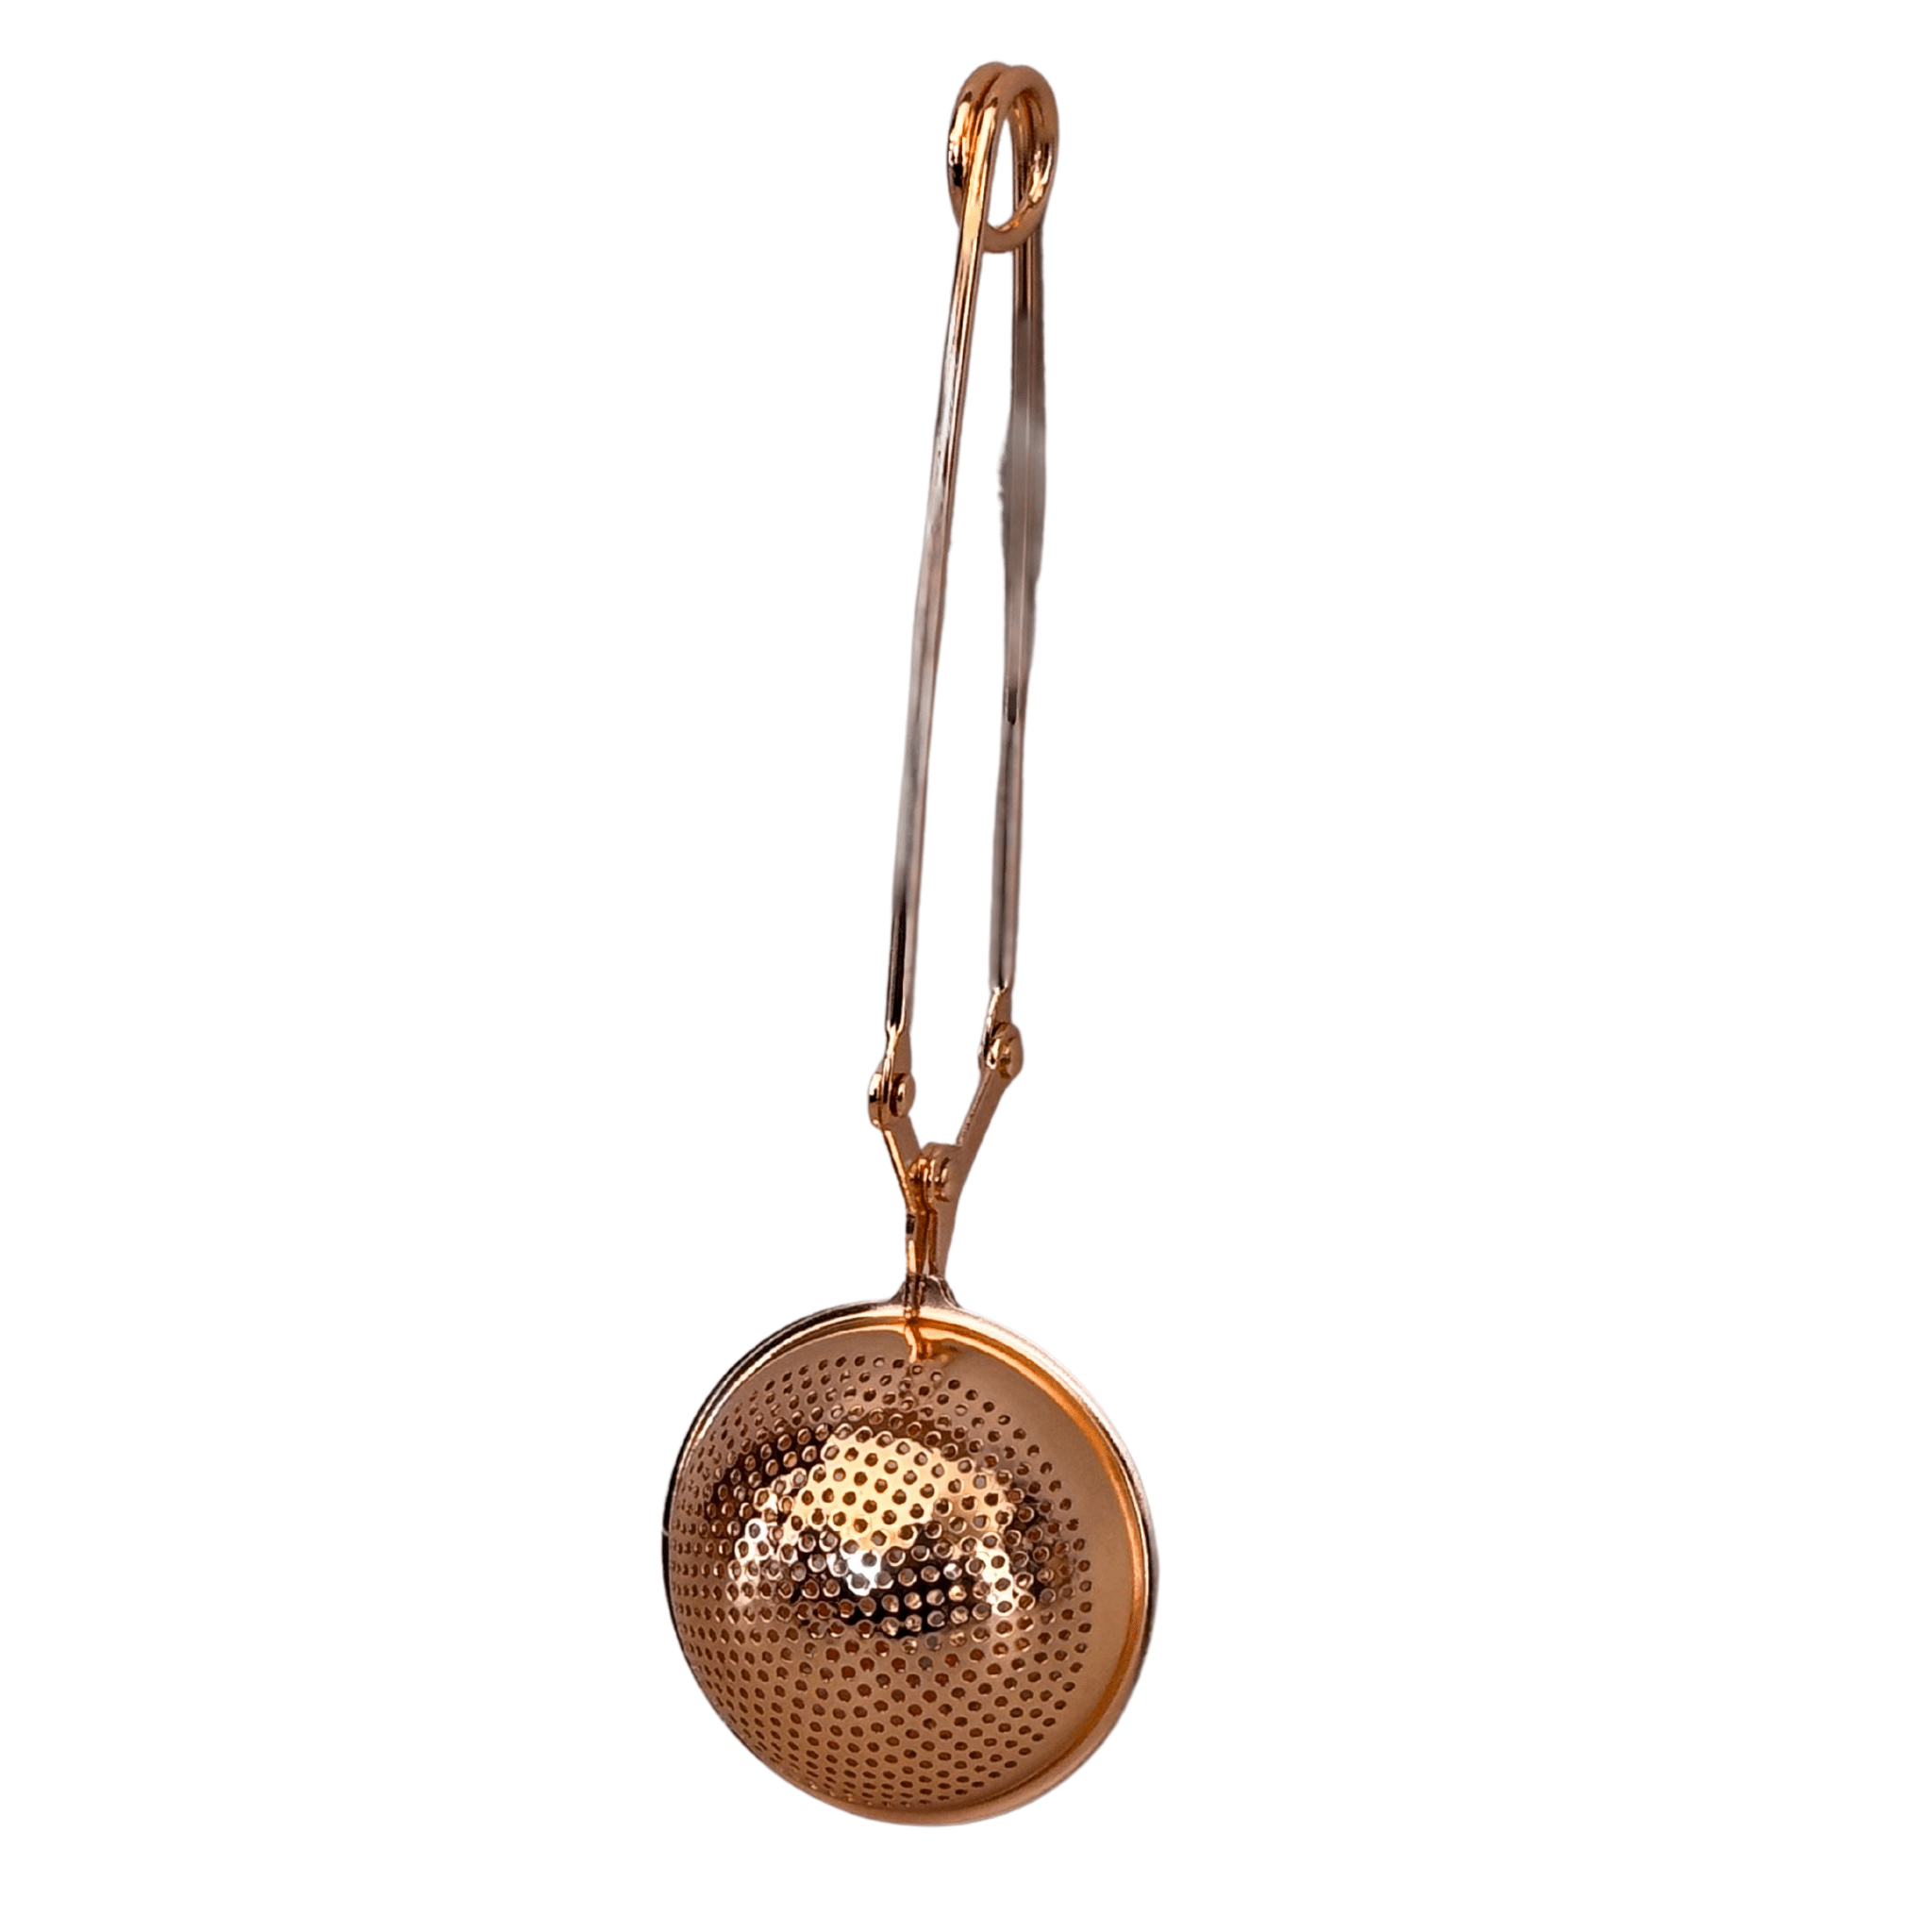 ROSE GOLD BALL TEA INFUSER W/HANDLE & CLAMP - PLUME & WILLOW